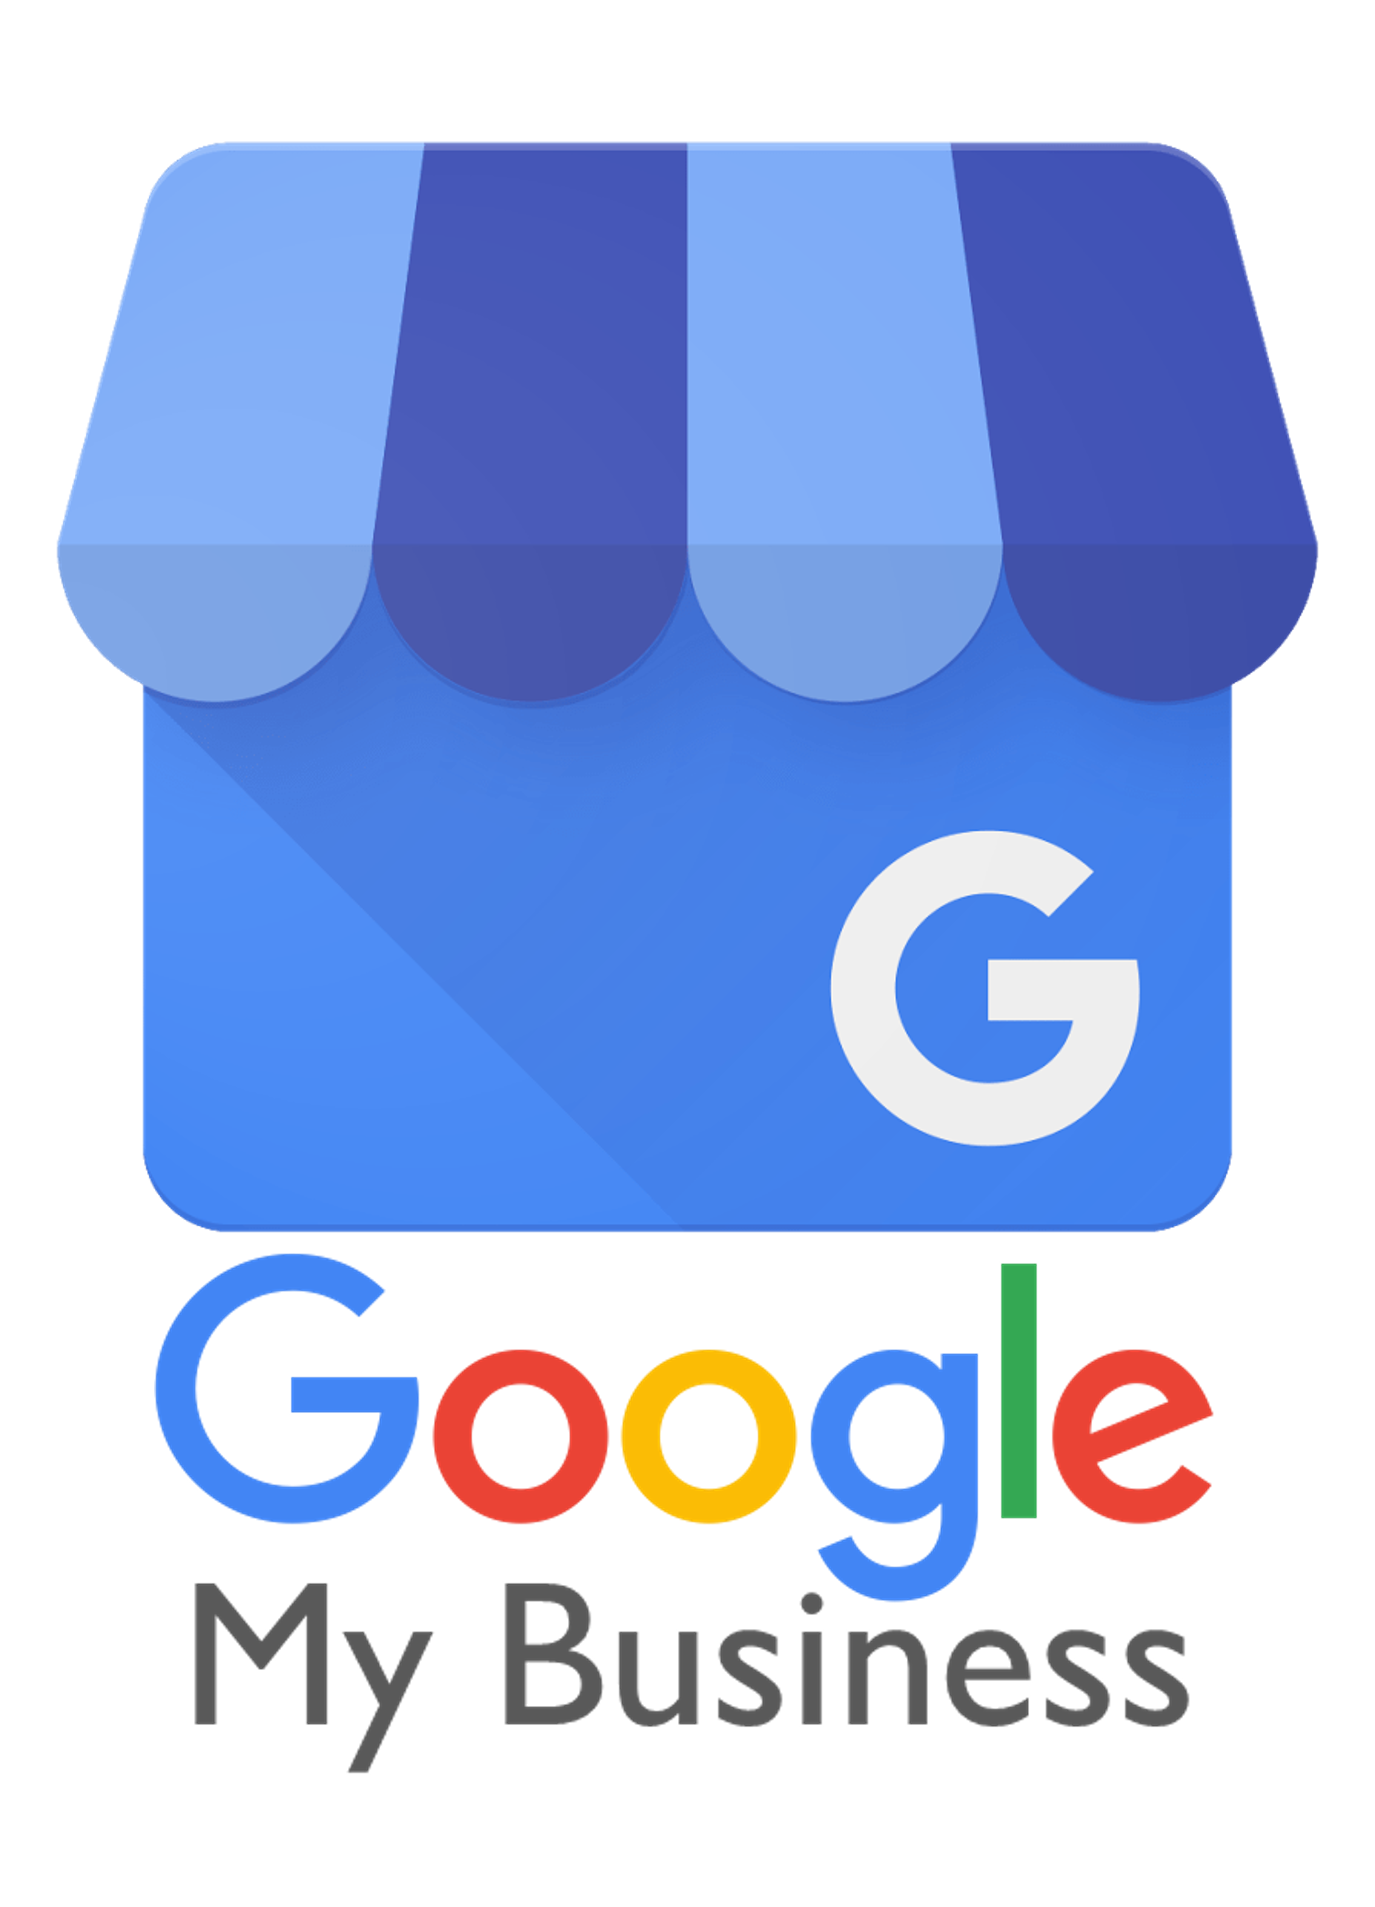 Google My Business logo - an illustration of a storefront with a colorful awning